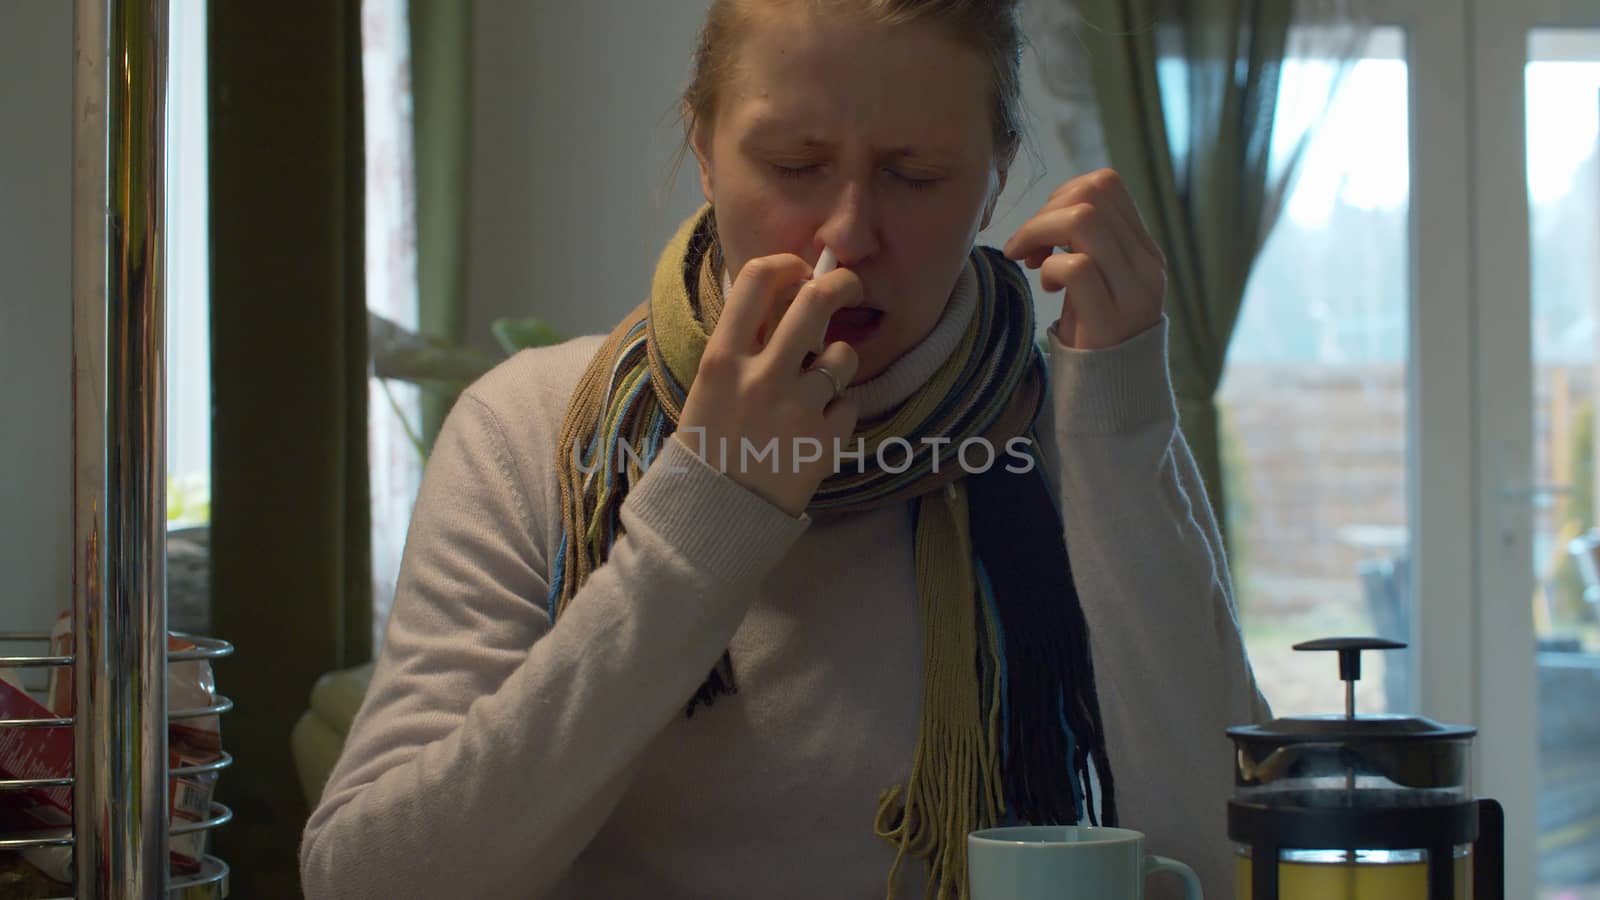 Young woman feeling blocked nose while cold and flu spraying nasal spray for treatment respiratory disease. The medicine is unpleasant to her - she frowns and sighs. Health care and therapy concept